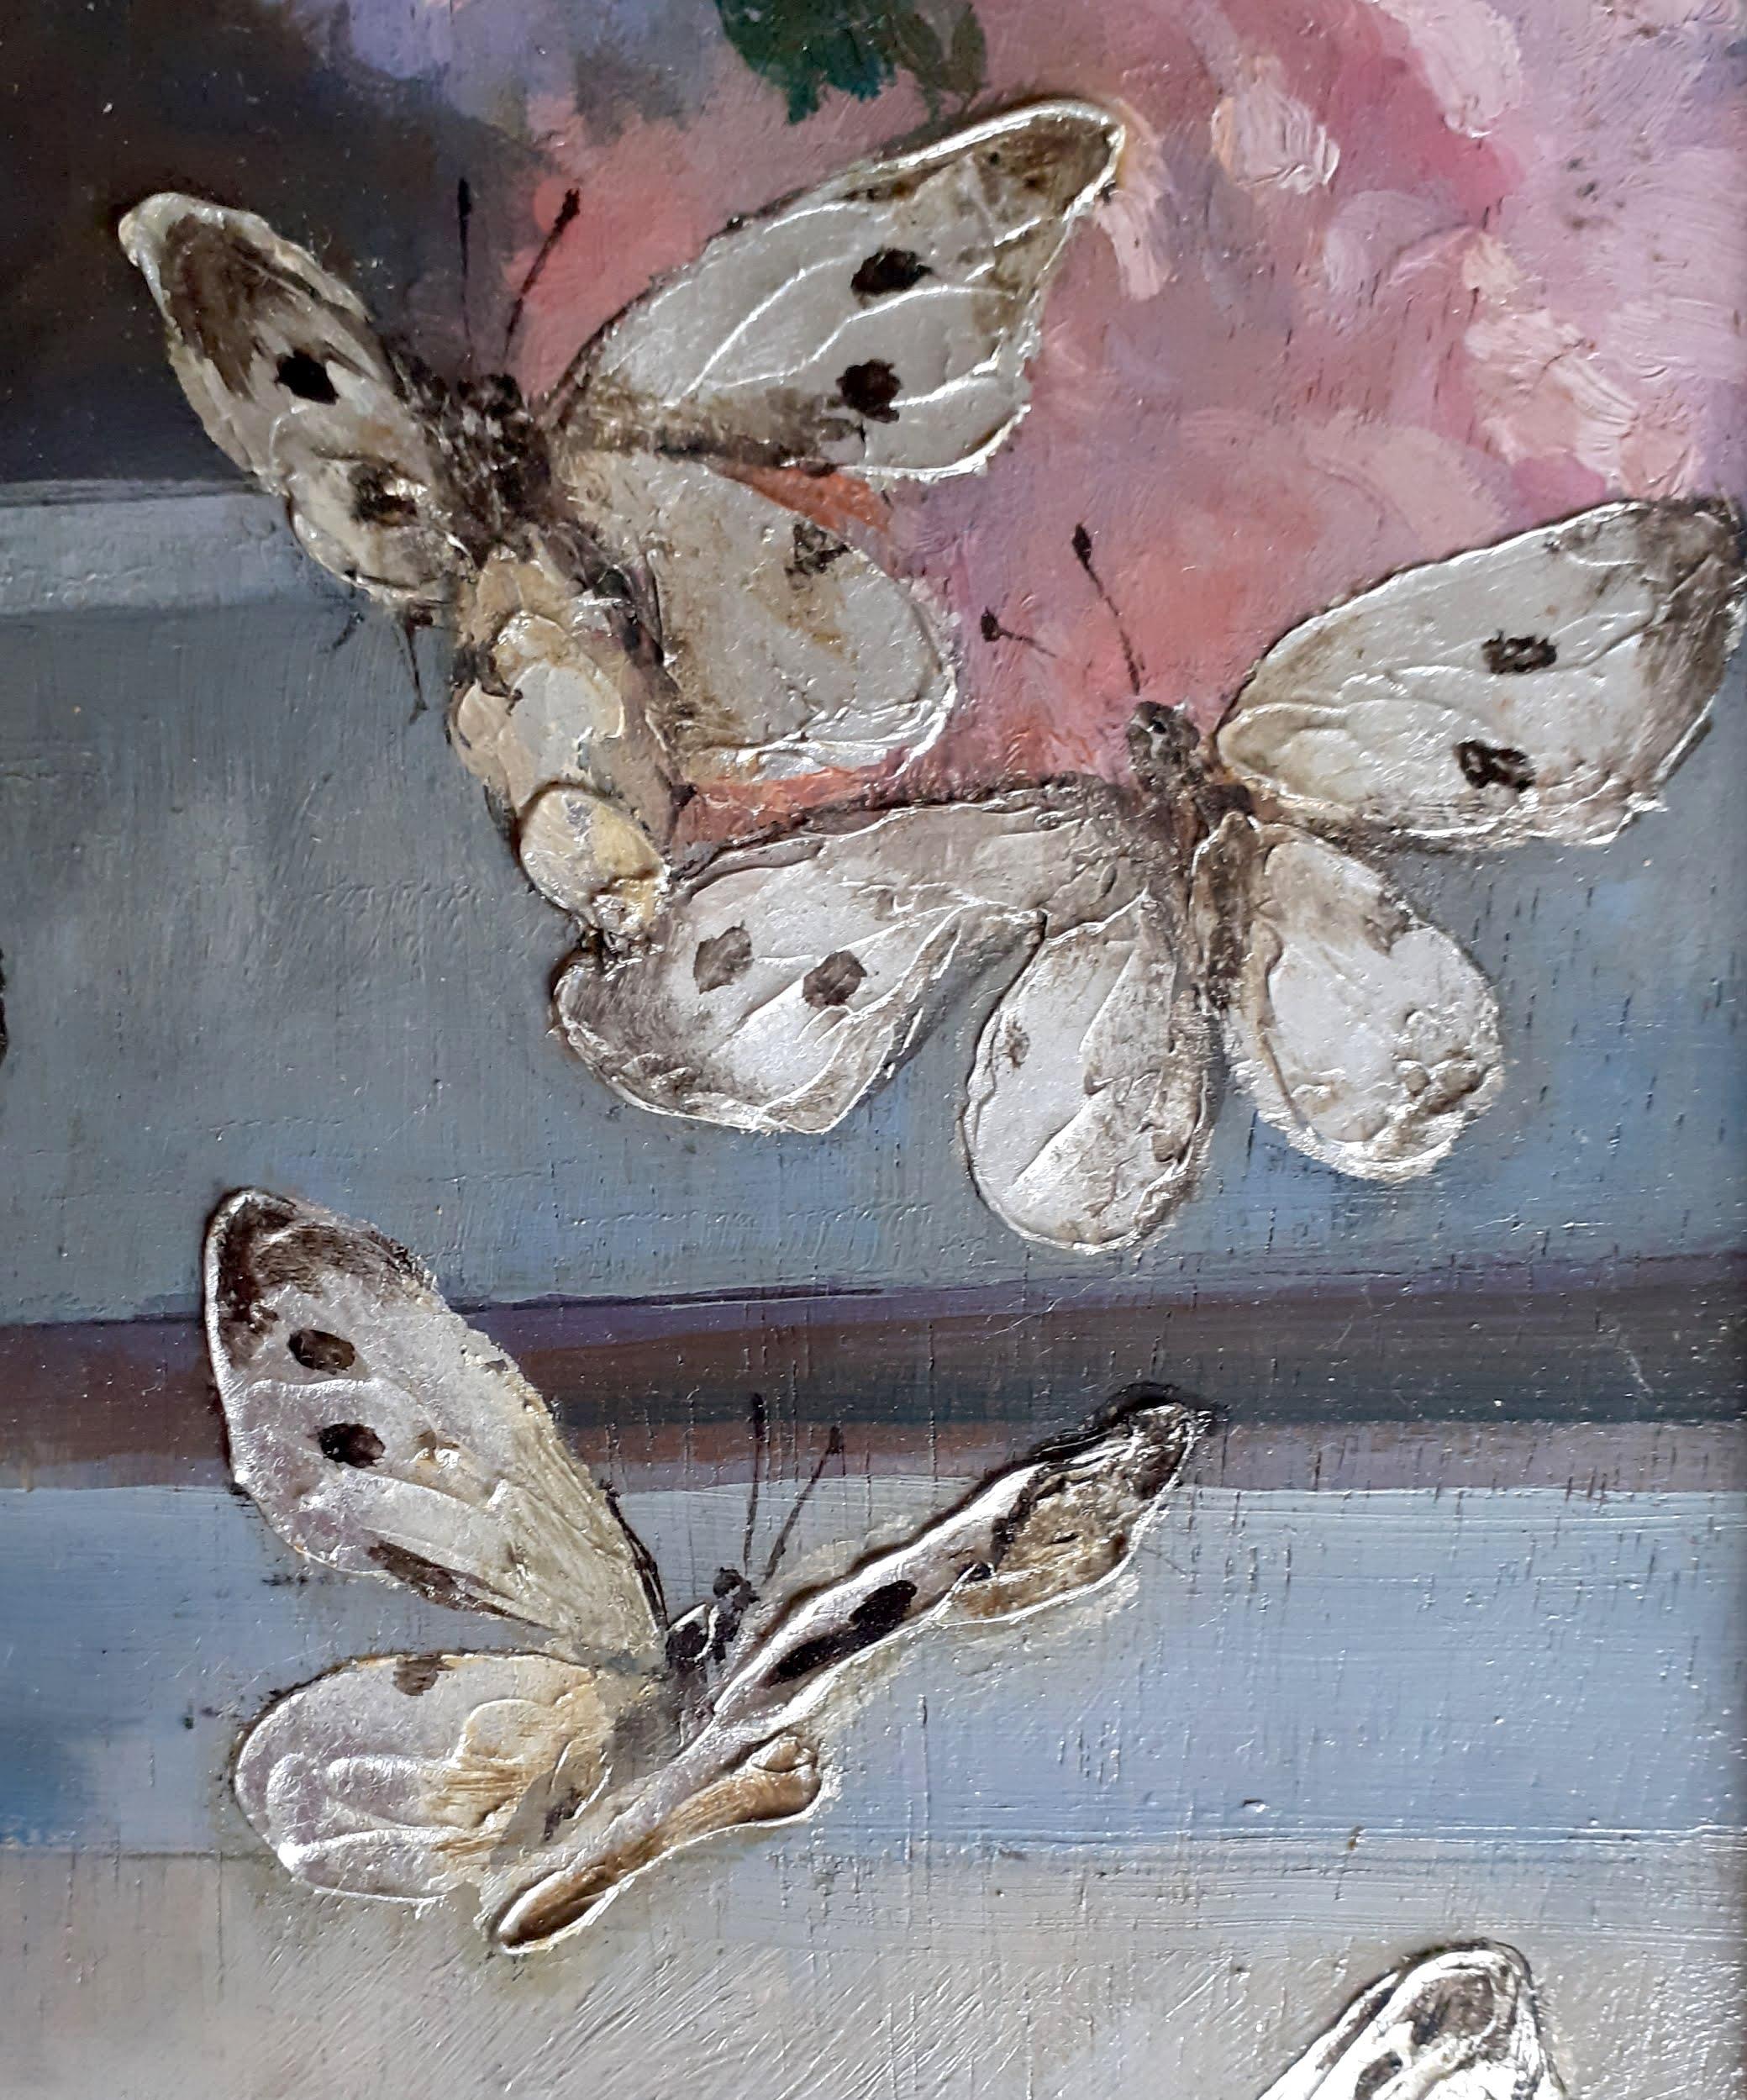 A joyful and etherial floral still life depicting a bouquet of flowers in a vase on a window sill - surrounded by a host of silver butterflies! The butterfly wings shimmer in actual silver, making the artwork a lovely example of the French arts and